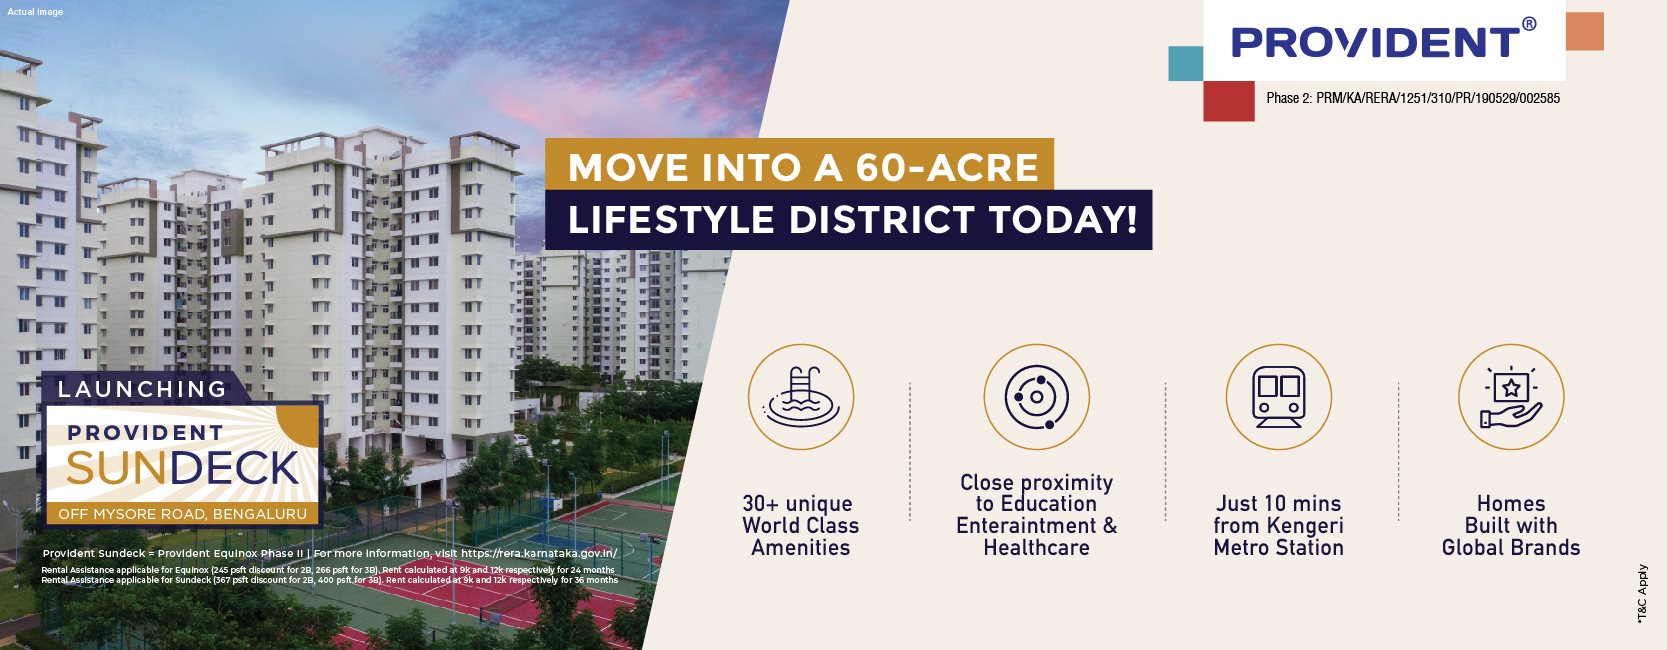 Move into a 60-acre lifestyle district today at Provident Sundeck, Bangalore